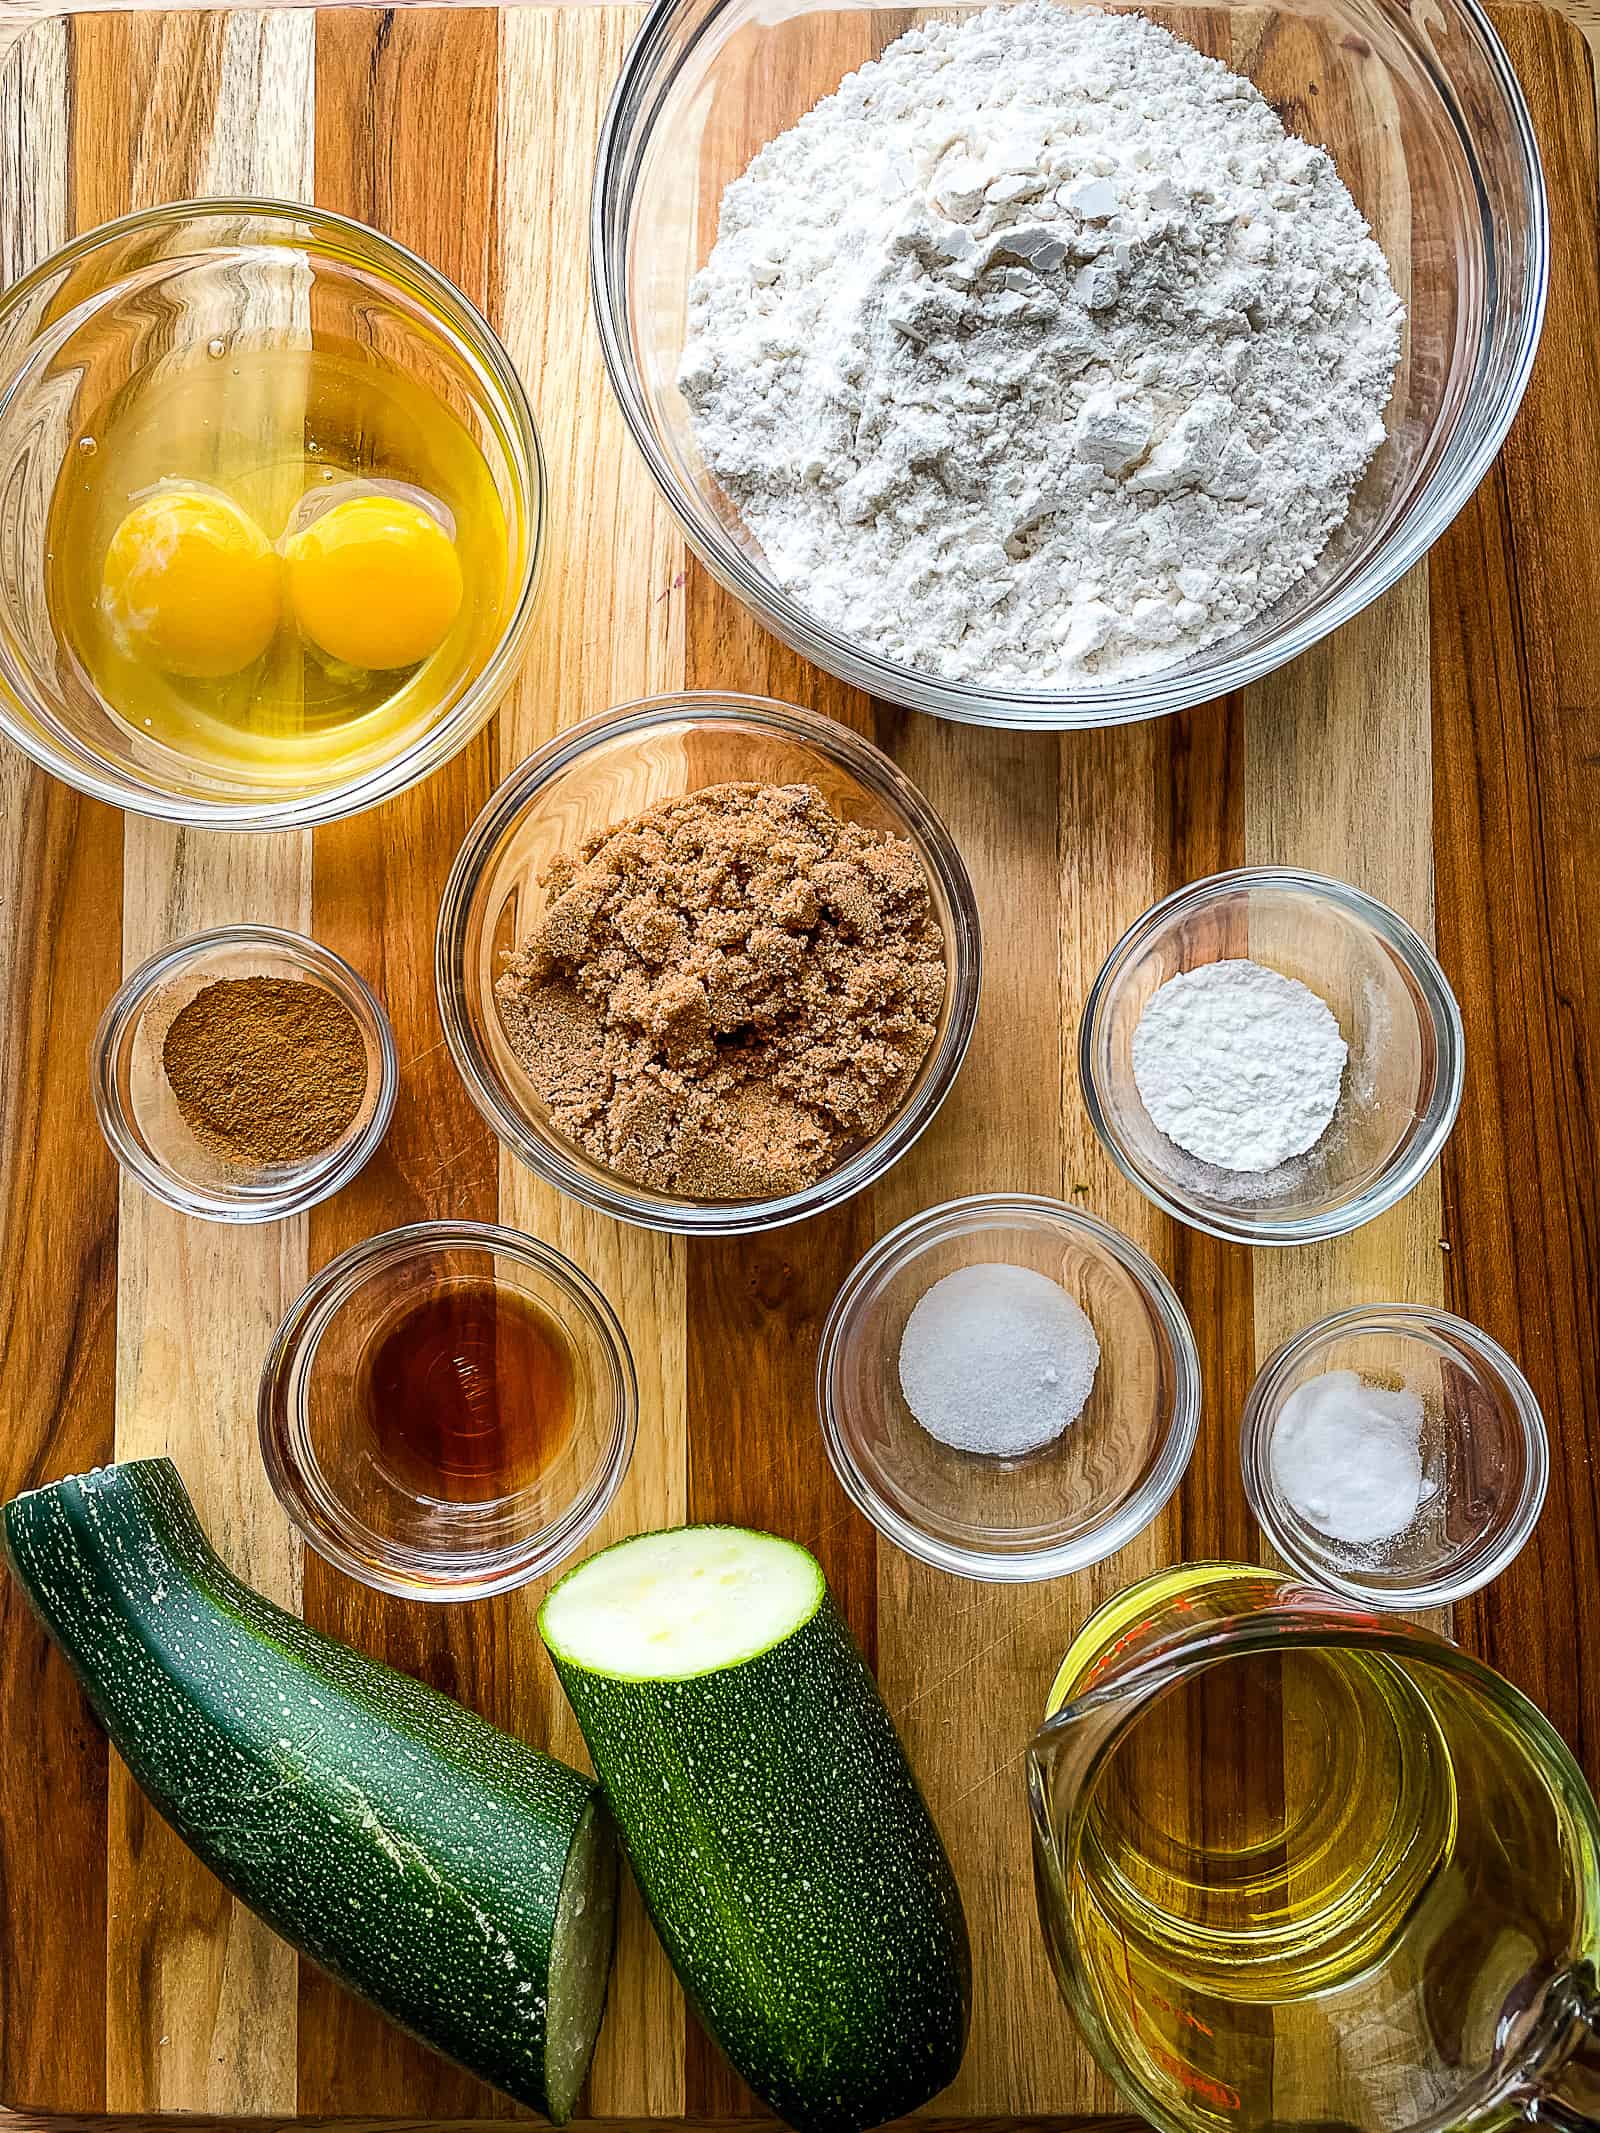 Ingredients for zucchini crumb muffins.